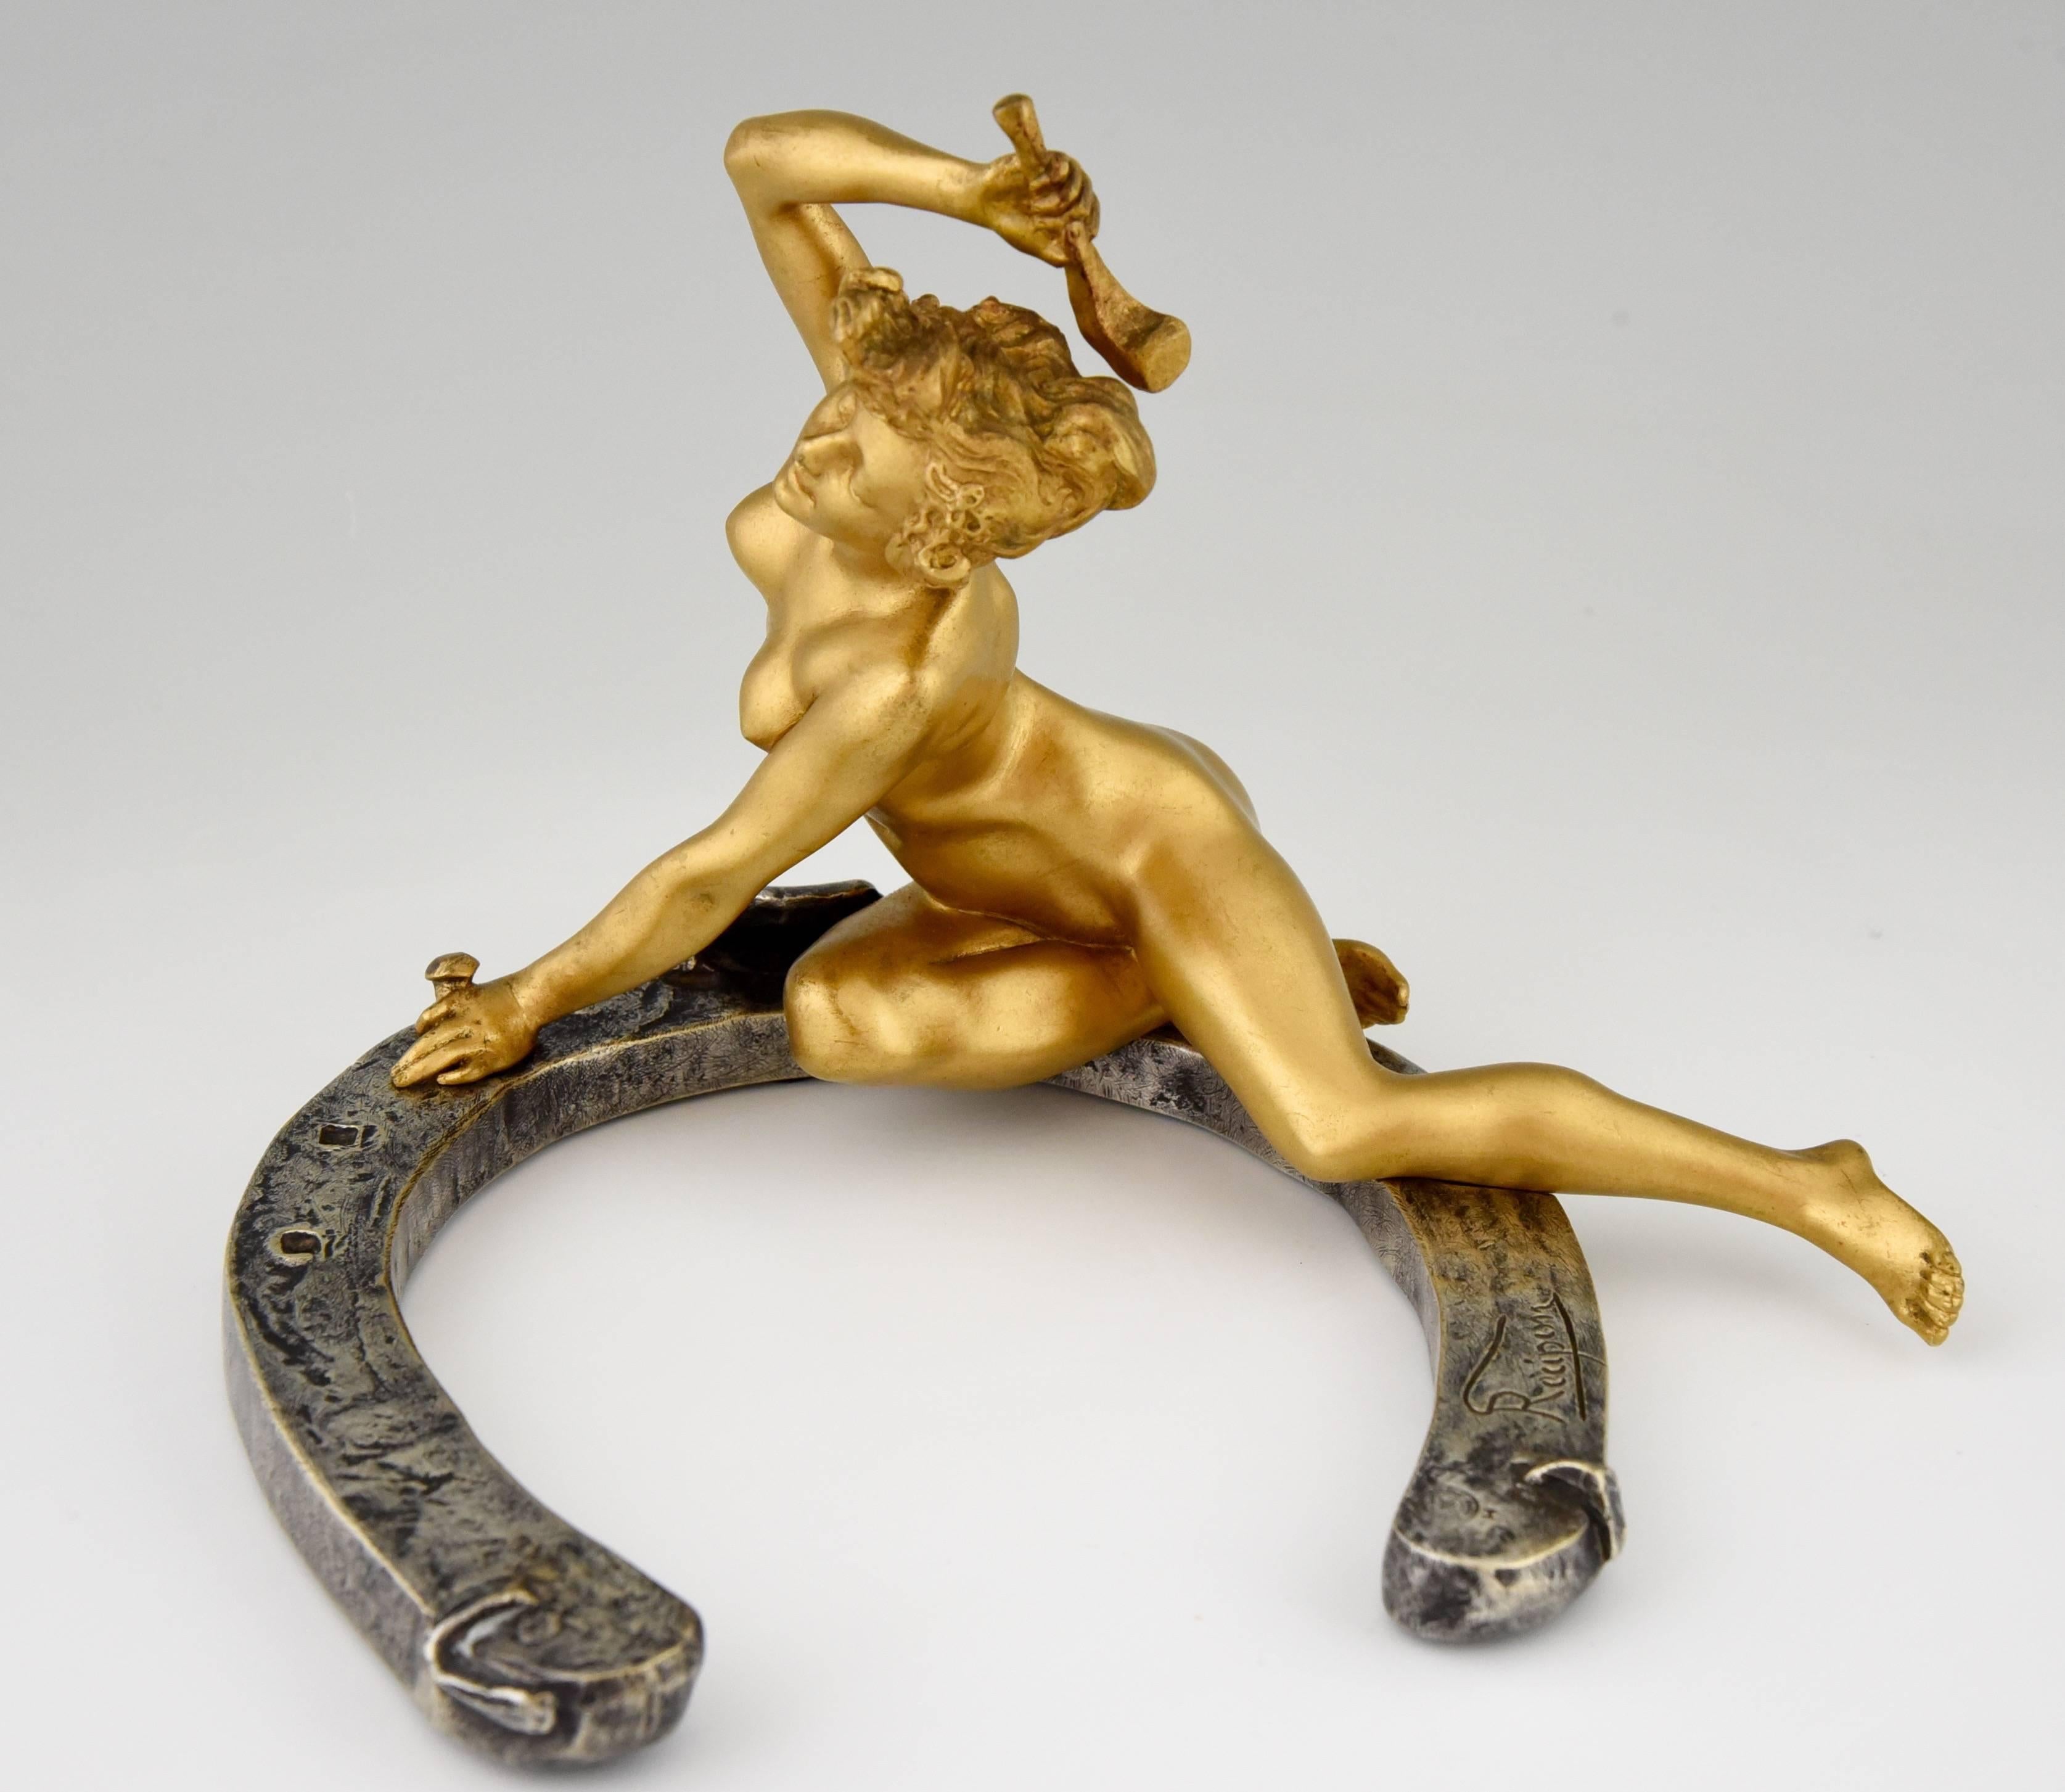 Very special Art Nouveau bronze nude on a horseshoe by the French artist Georges Récipon, this work is illustrated in several books.

Artist / maker:
Georges Récipon.
Signature / marks:
Récipon. Susse Frères Foundry ed. Paris.
Style:
Art